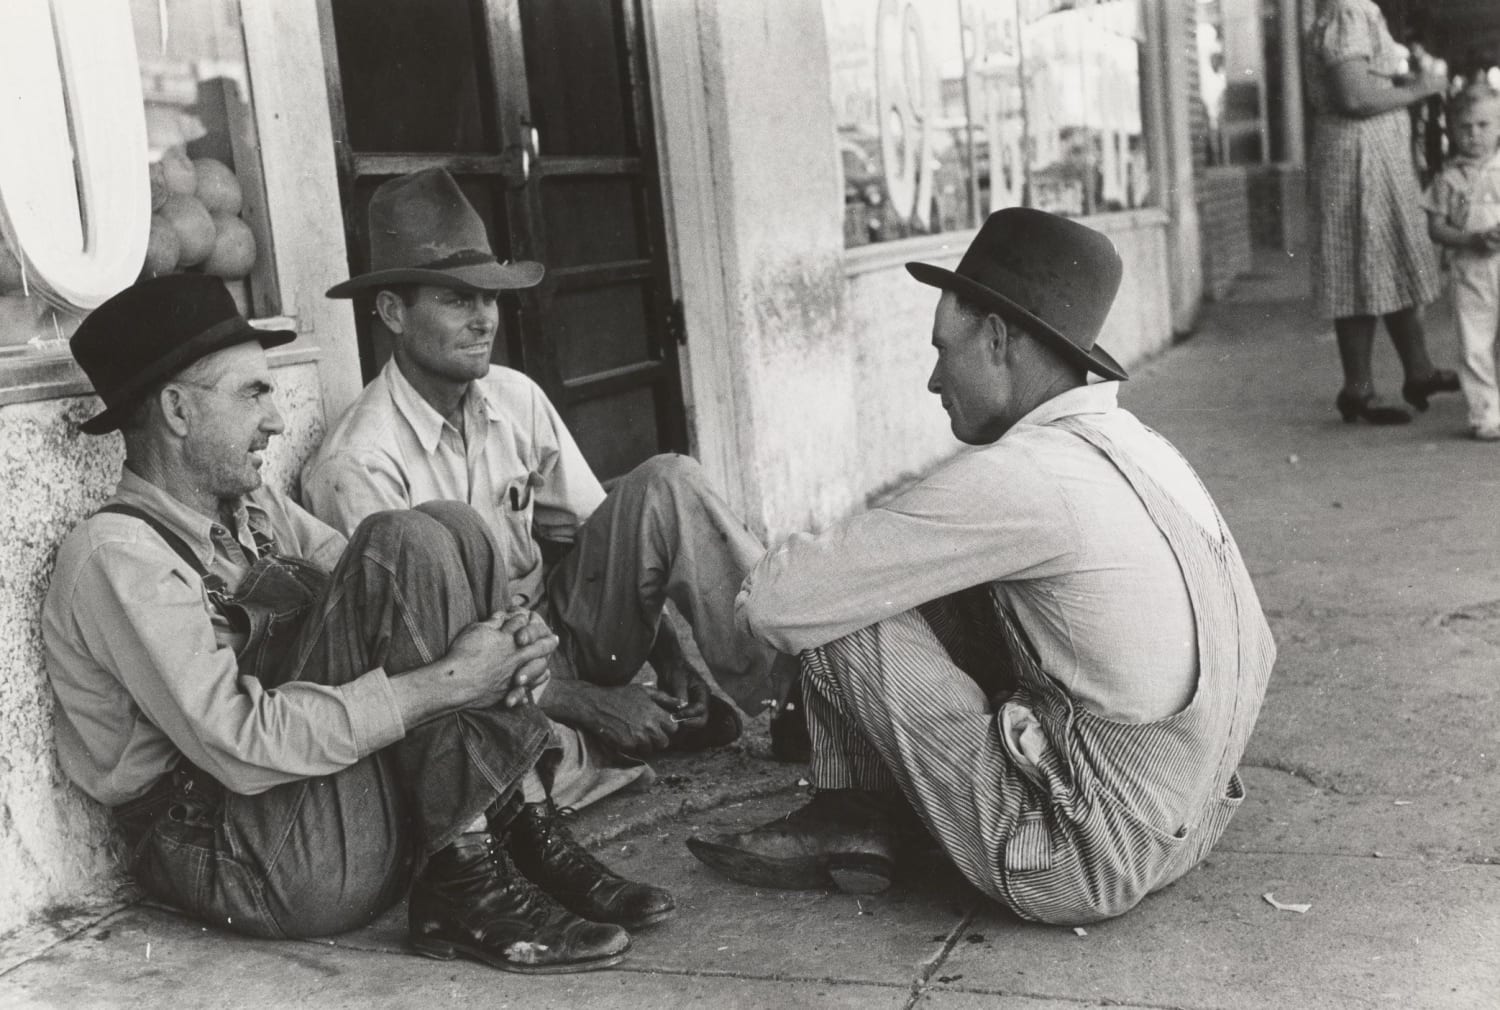 1939. Farmers sitting against wall and squatting on sidewalk, Spur, Texas. Photographer Lee Russell